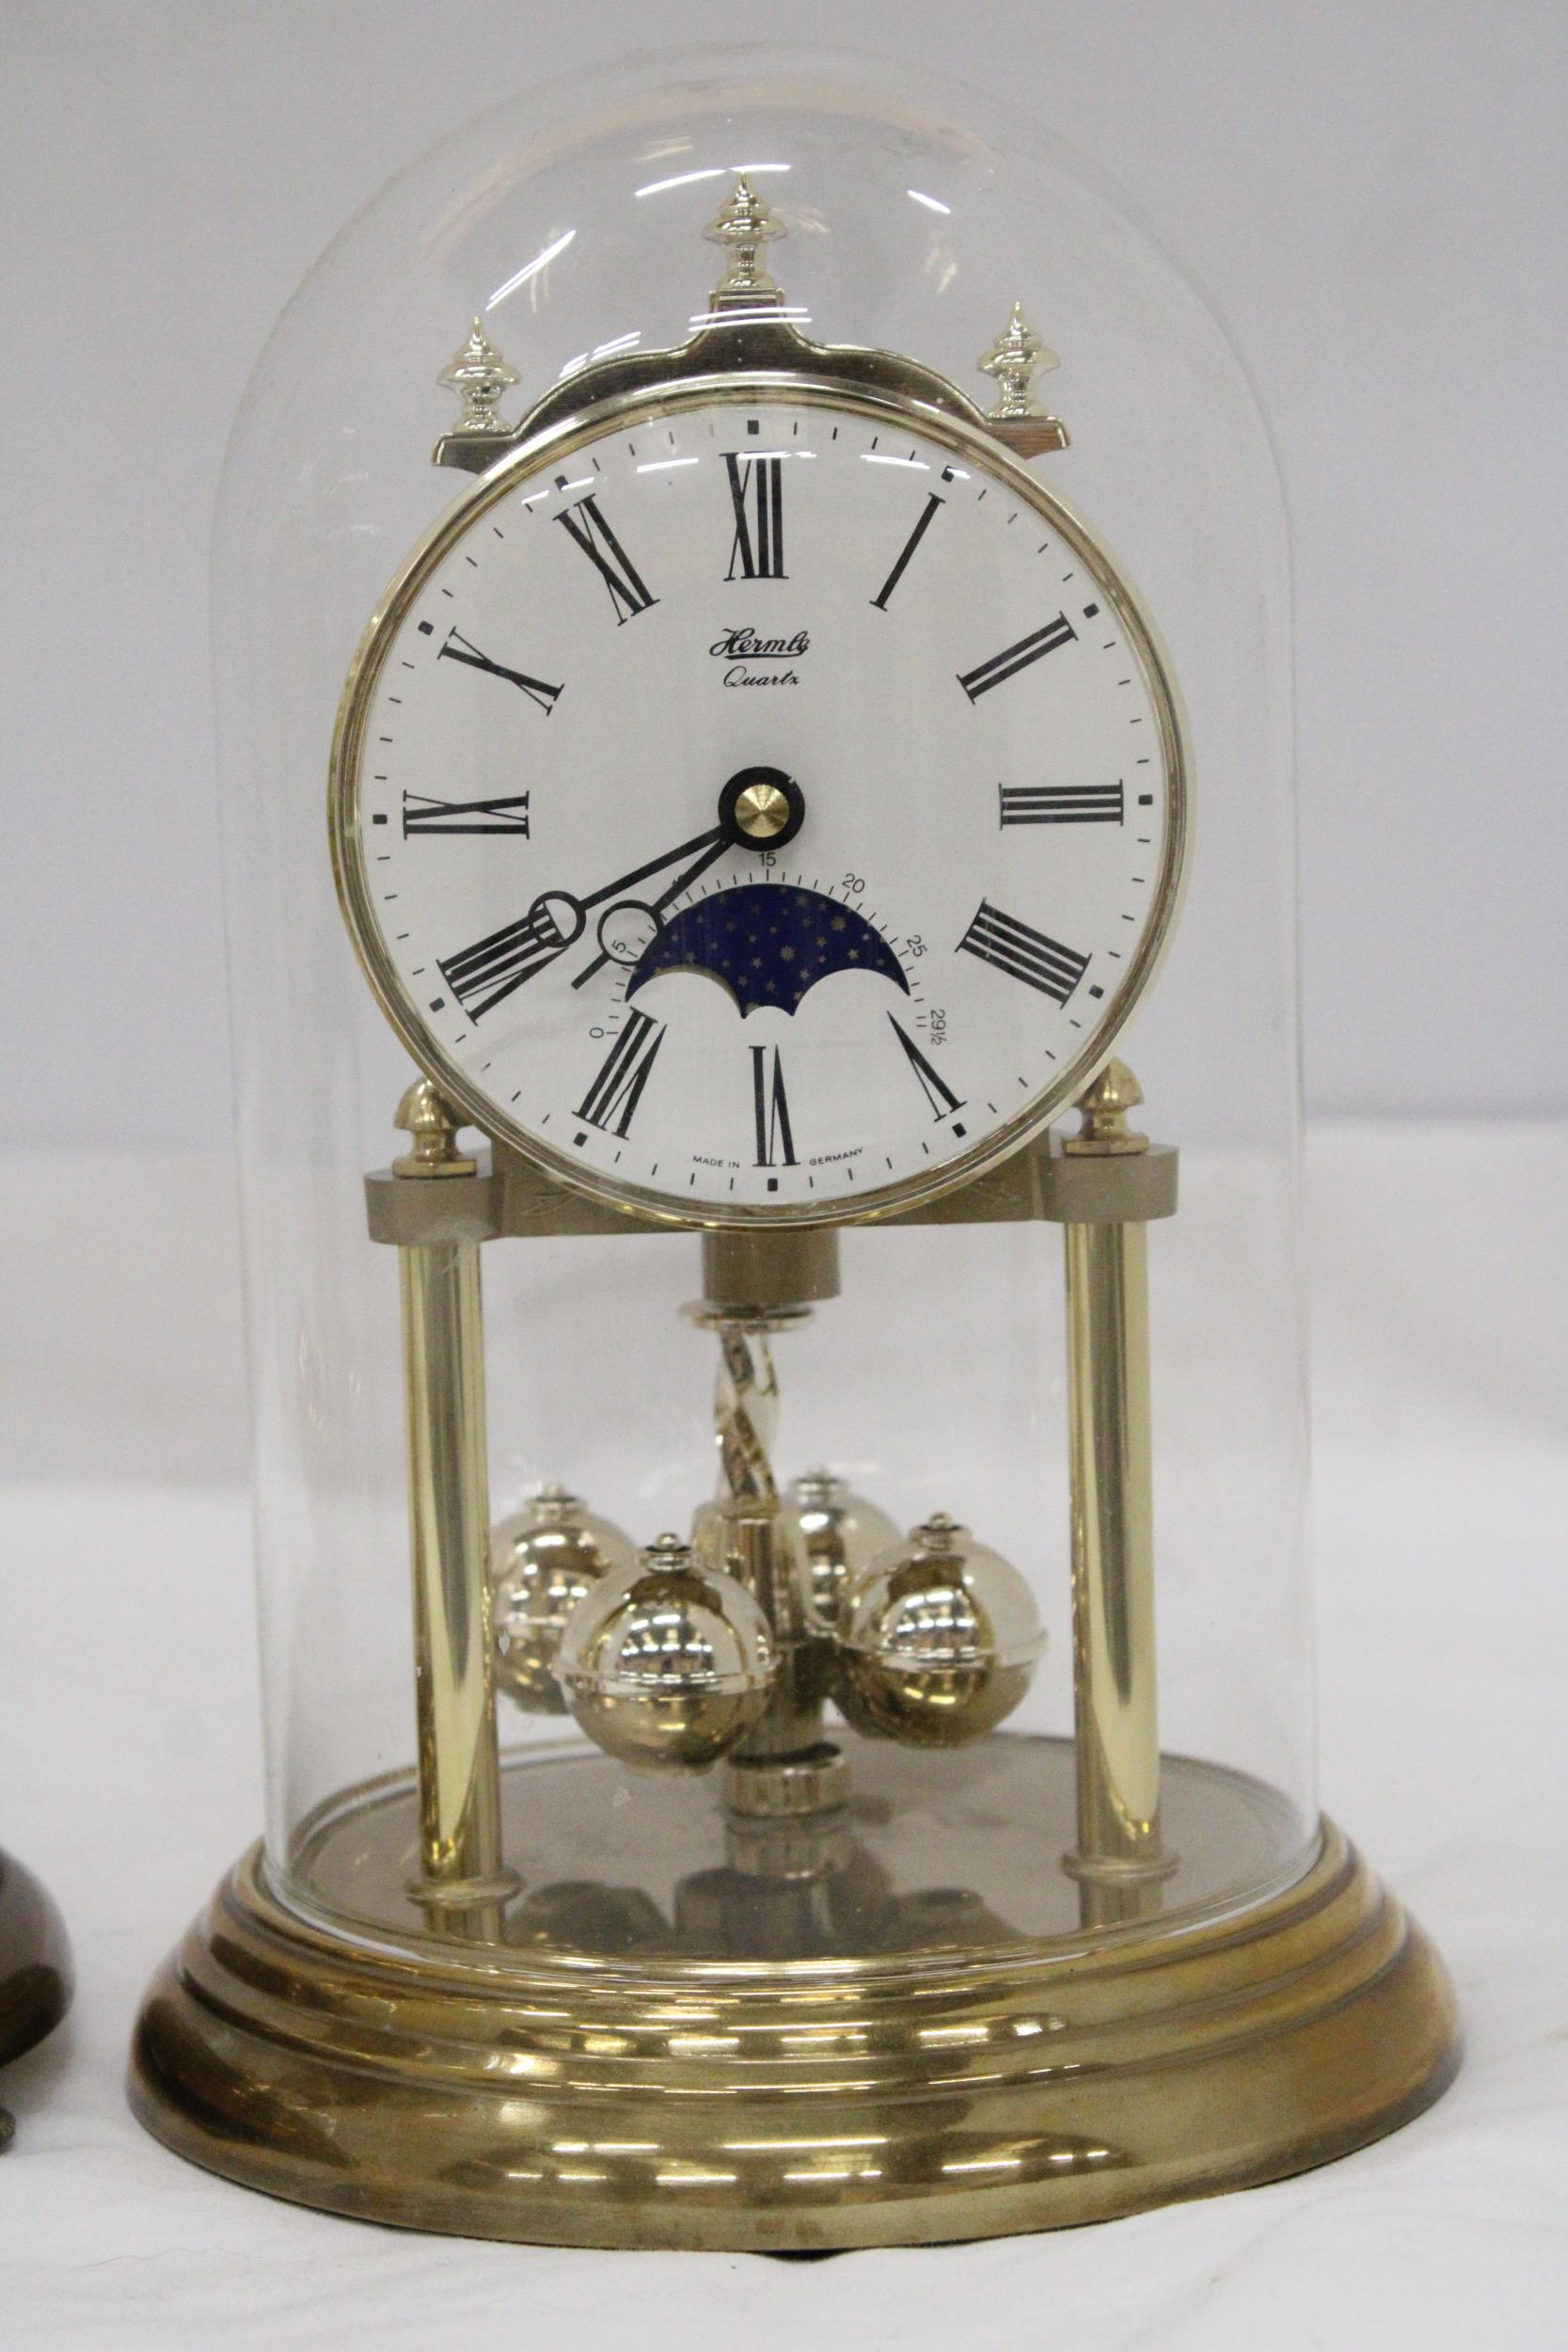 TWO BRASS ANNIVERSARY CLOCKS WITH GLASS DOMES - Image 2 of 6